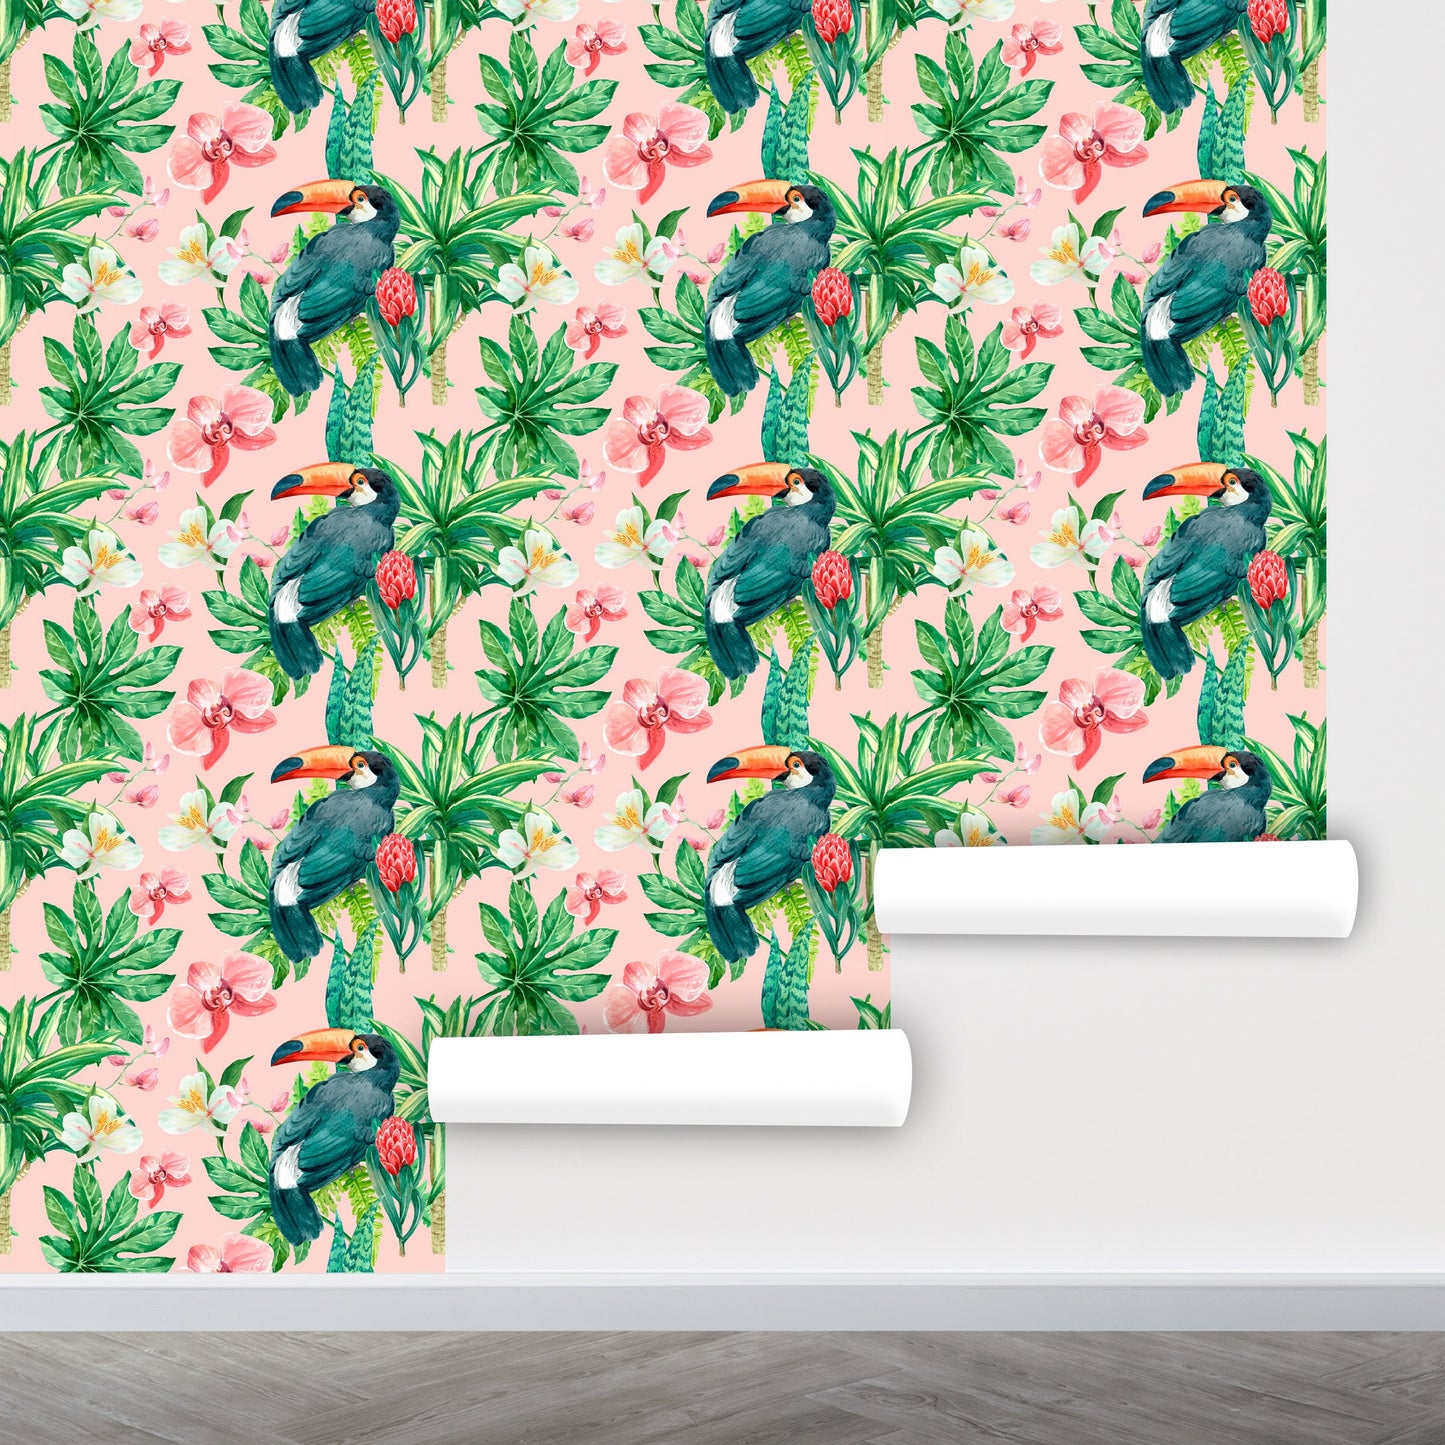 Parrot Wallpaper, Tropical Wallpaper Peel and Stick, Orchid Wallpaper, Green Leaf Wallpaper, Removable Wall Paper